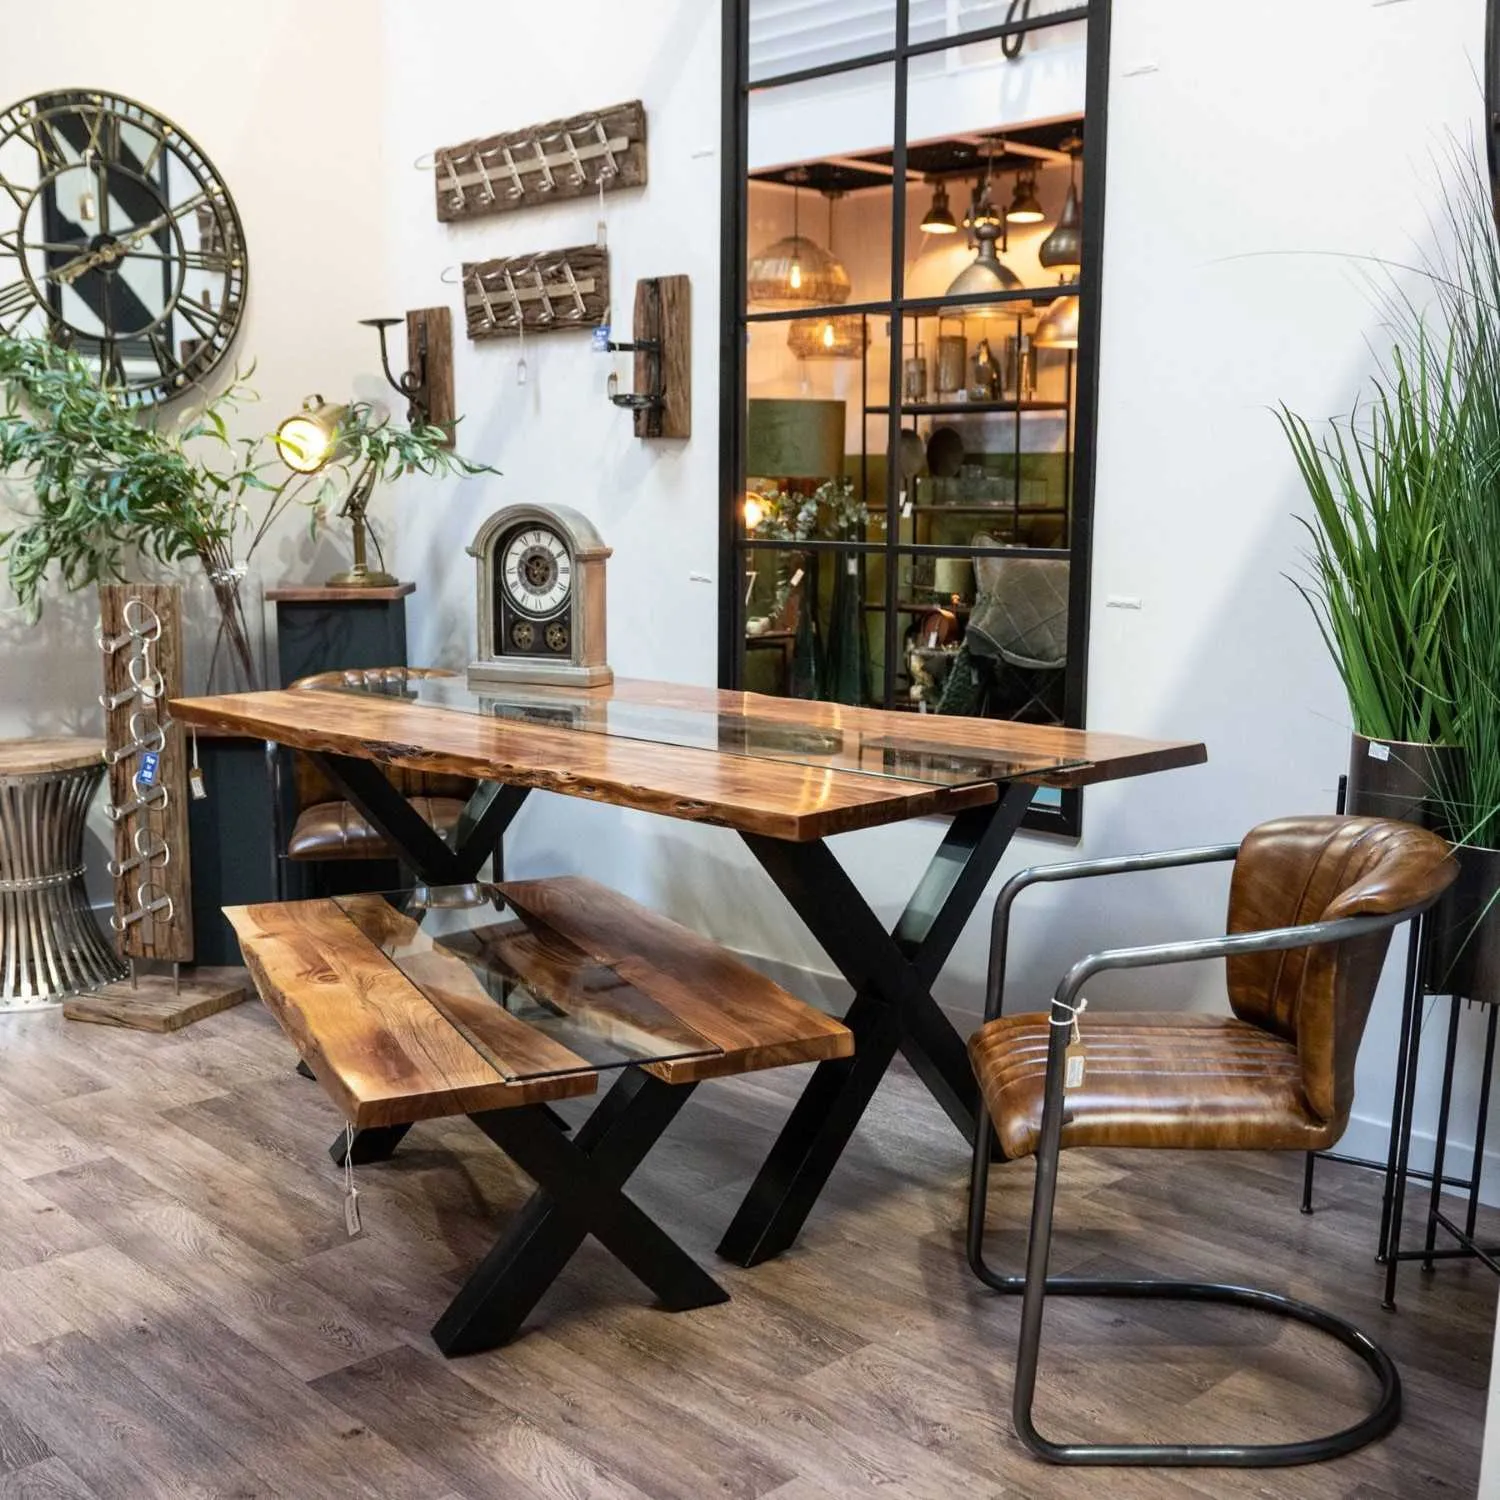 Modern Reclaimed Wood Dining Table Live Edge and Glass River Centre X Leg Frame